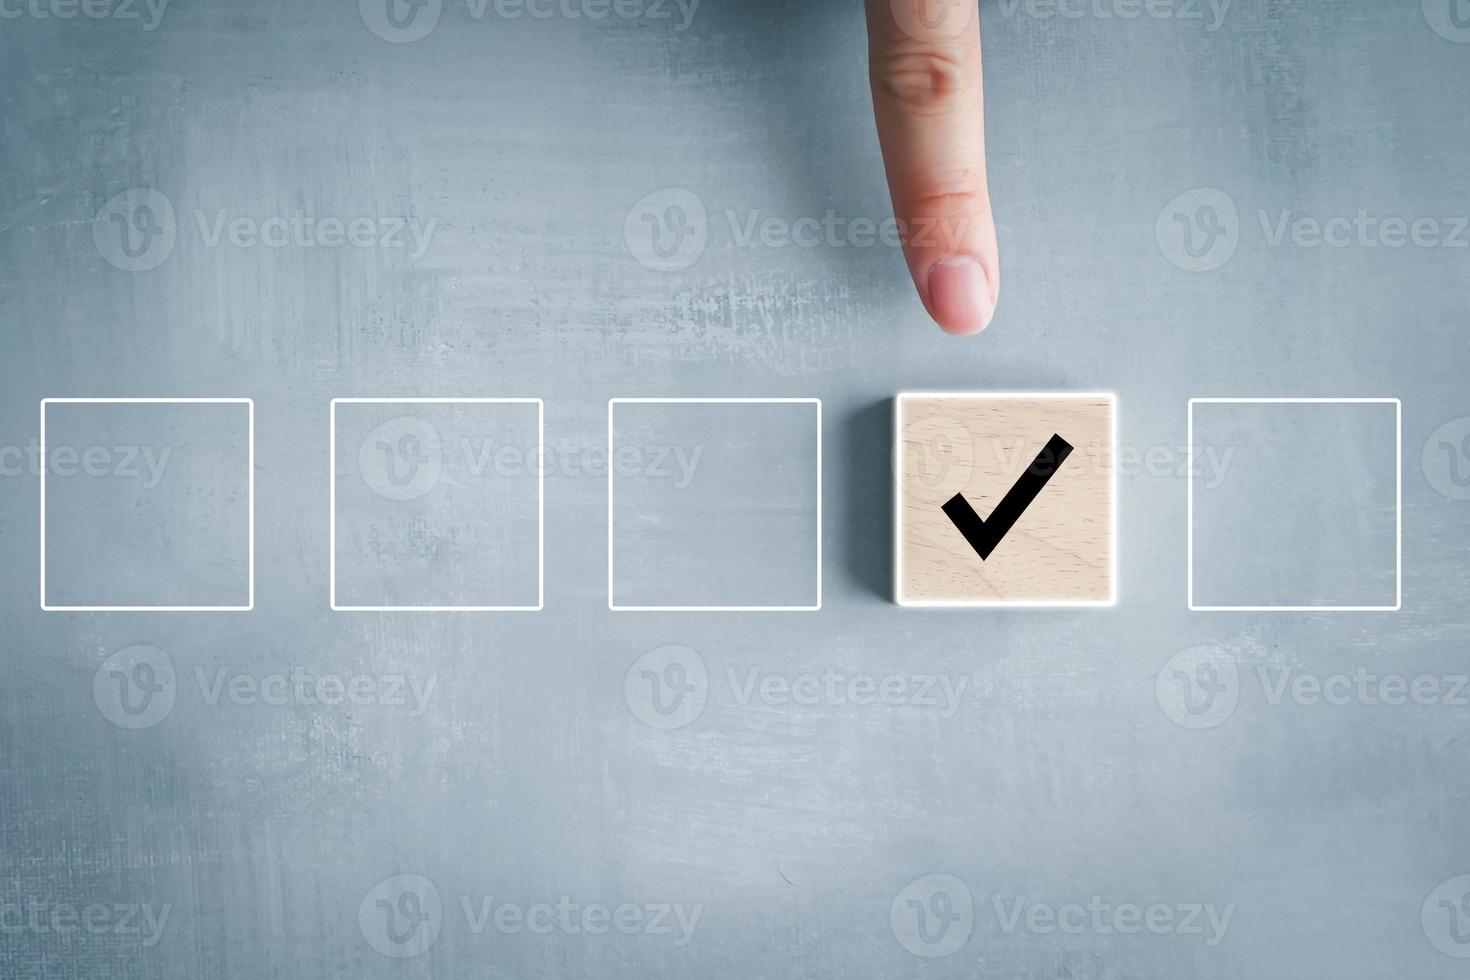 Elections and Voting, Vote, to do list, checklist, Task list, Survey and assessment concept. Hand holding check mark on wooden block and blank check box on wooden cubes. photo